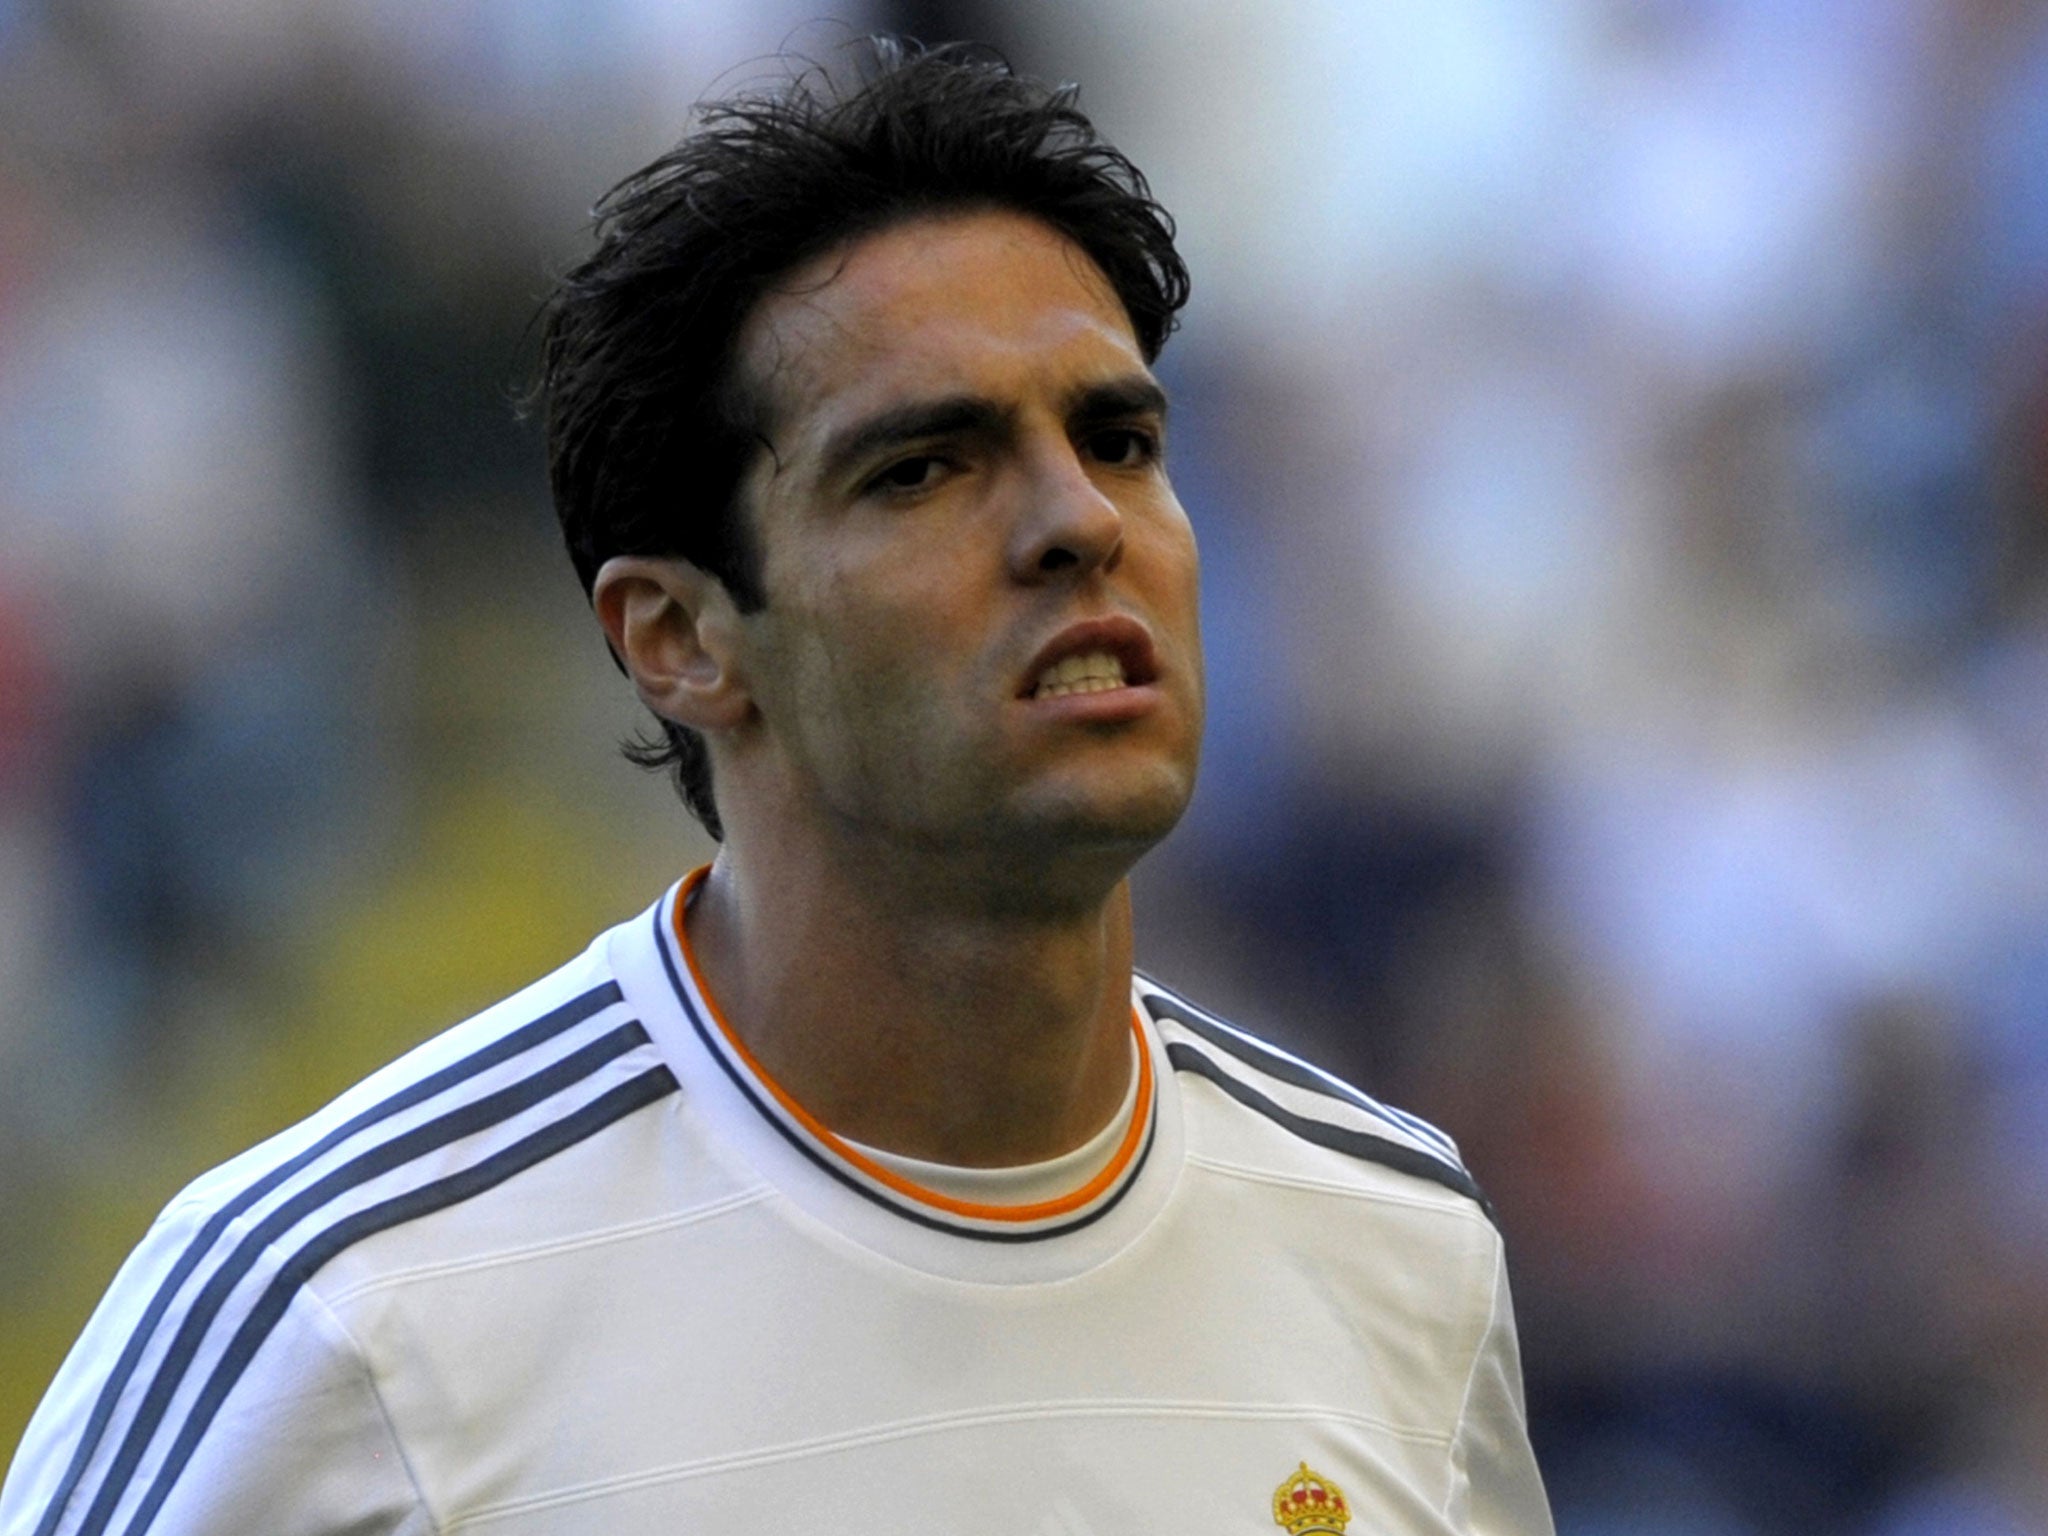 Kaka has stated that he wants to leave Real Madrid